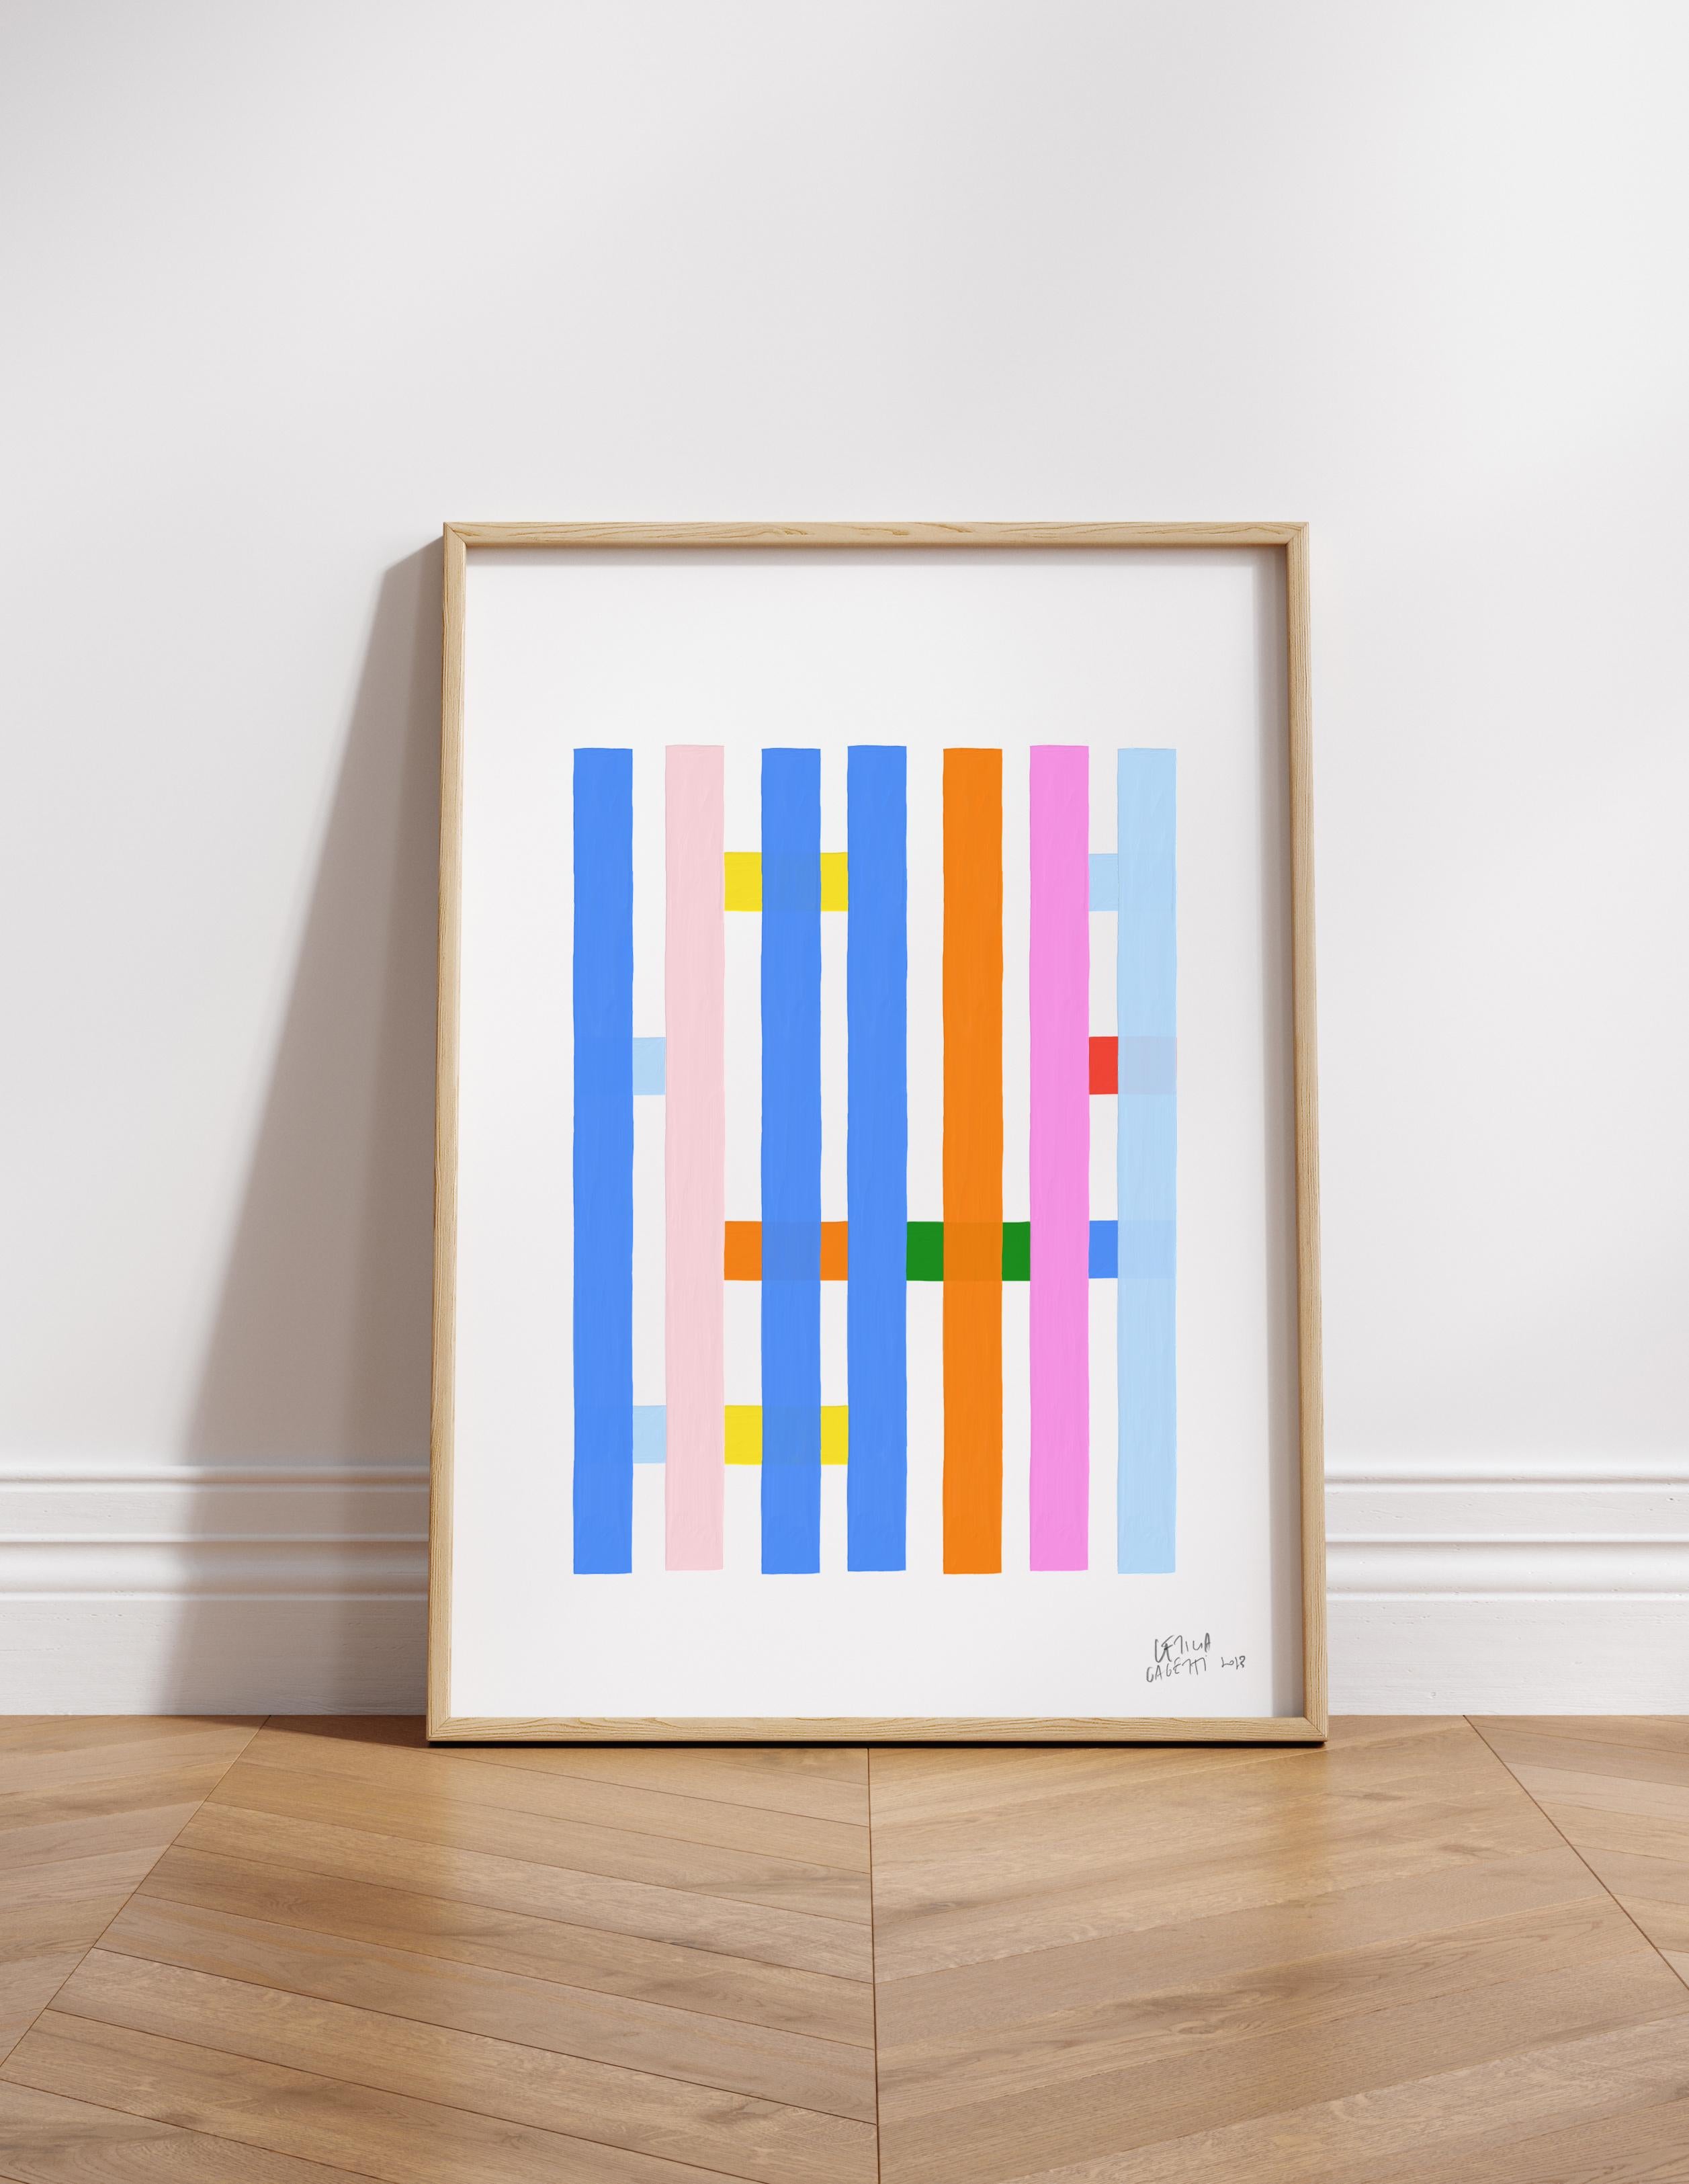 Abstract print by Leticia Gagetti, printed on 260g high-quality paper with a matte finish that ensures vivid and saturated colors.

Crafted through giclée printing on museum-quality paper, this fine art print utilizes archival inks to capture rich